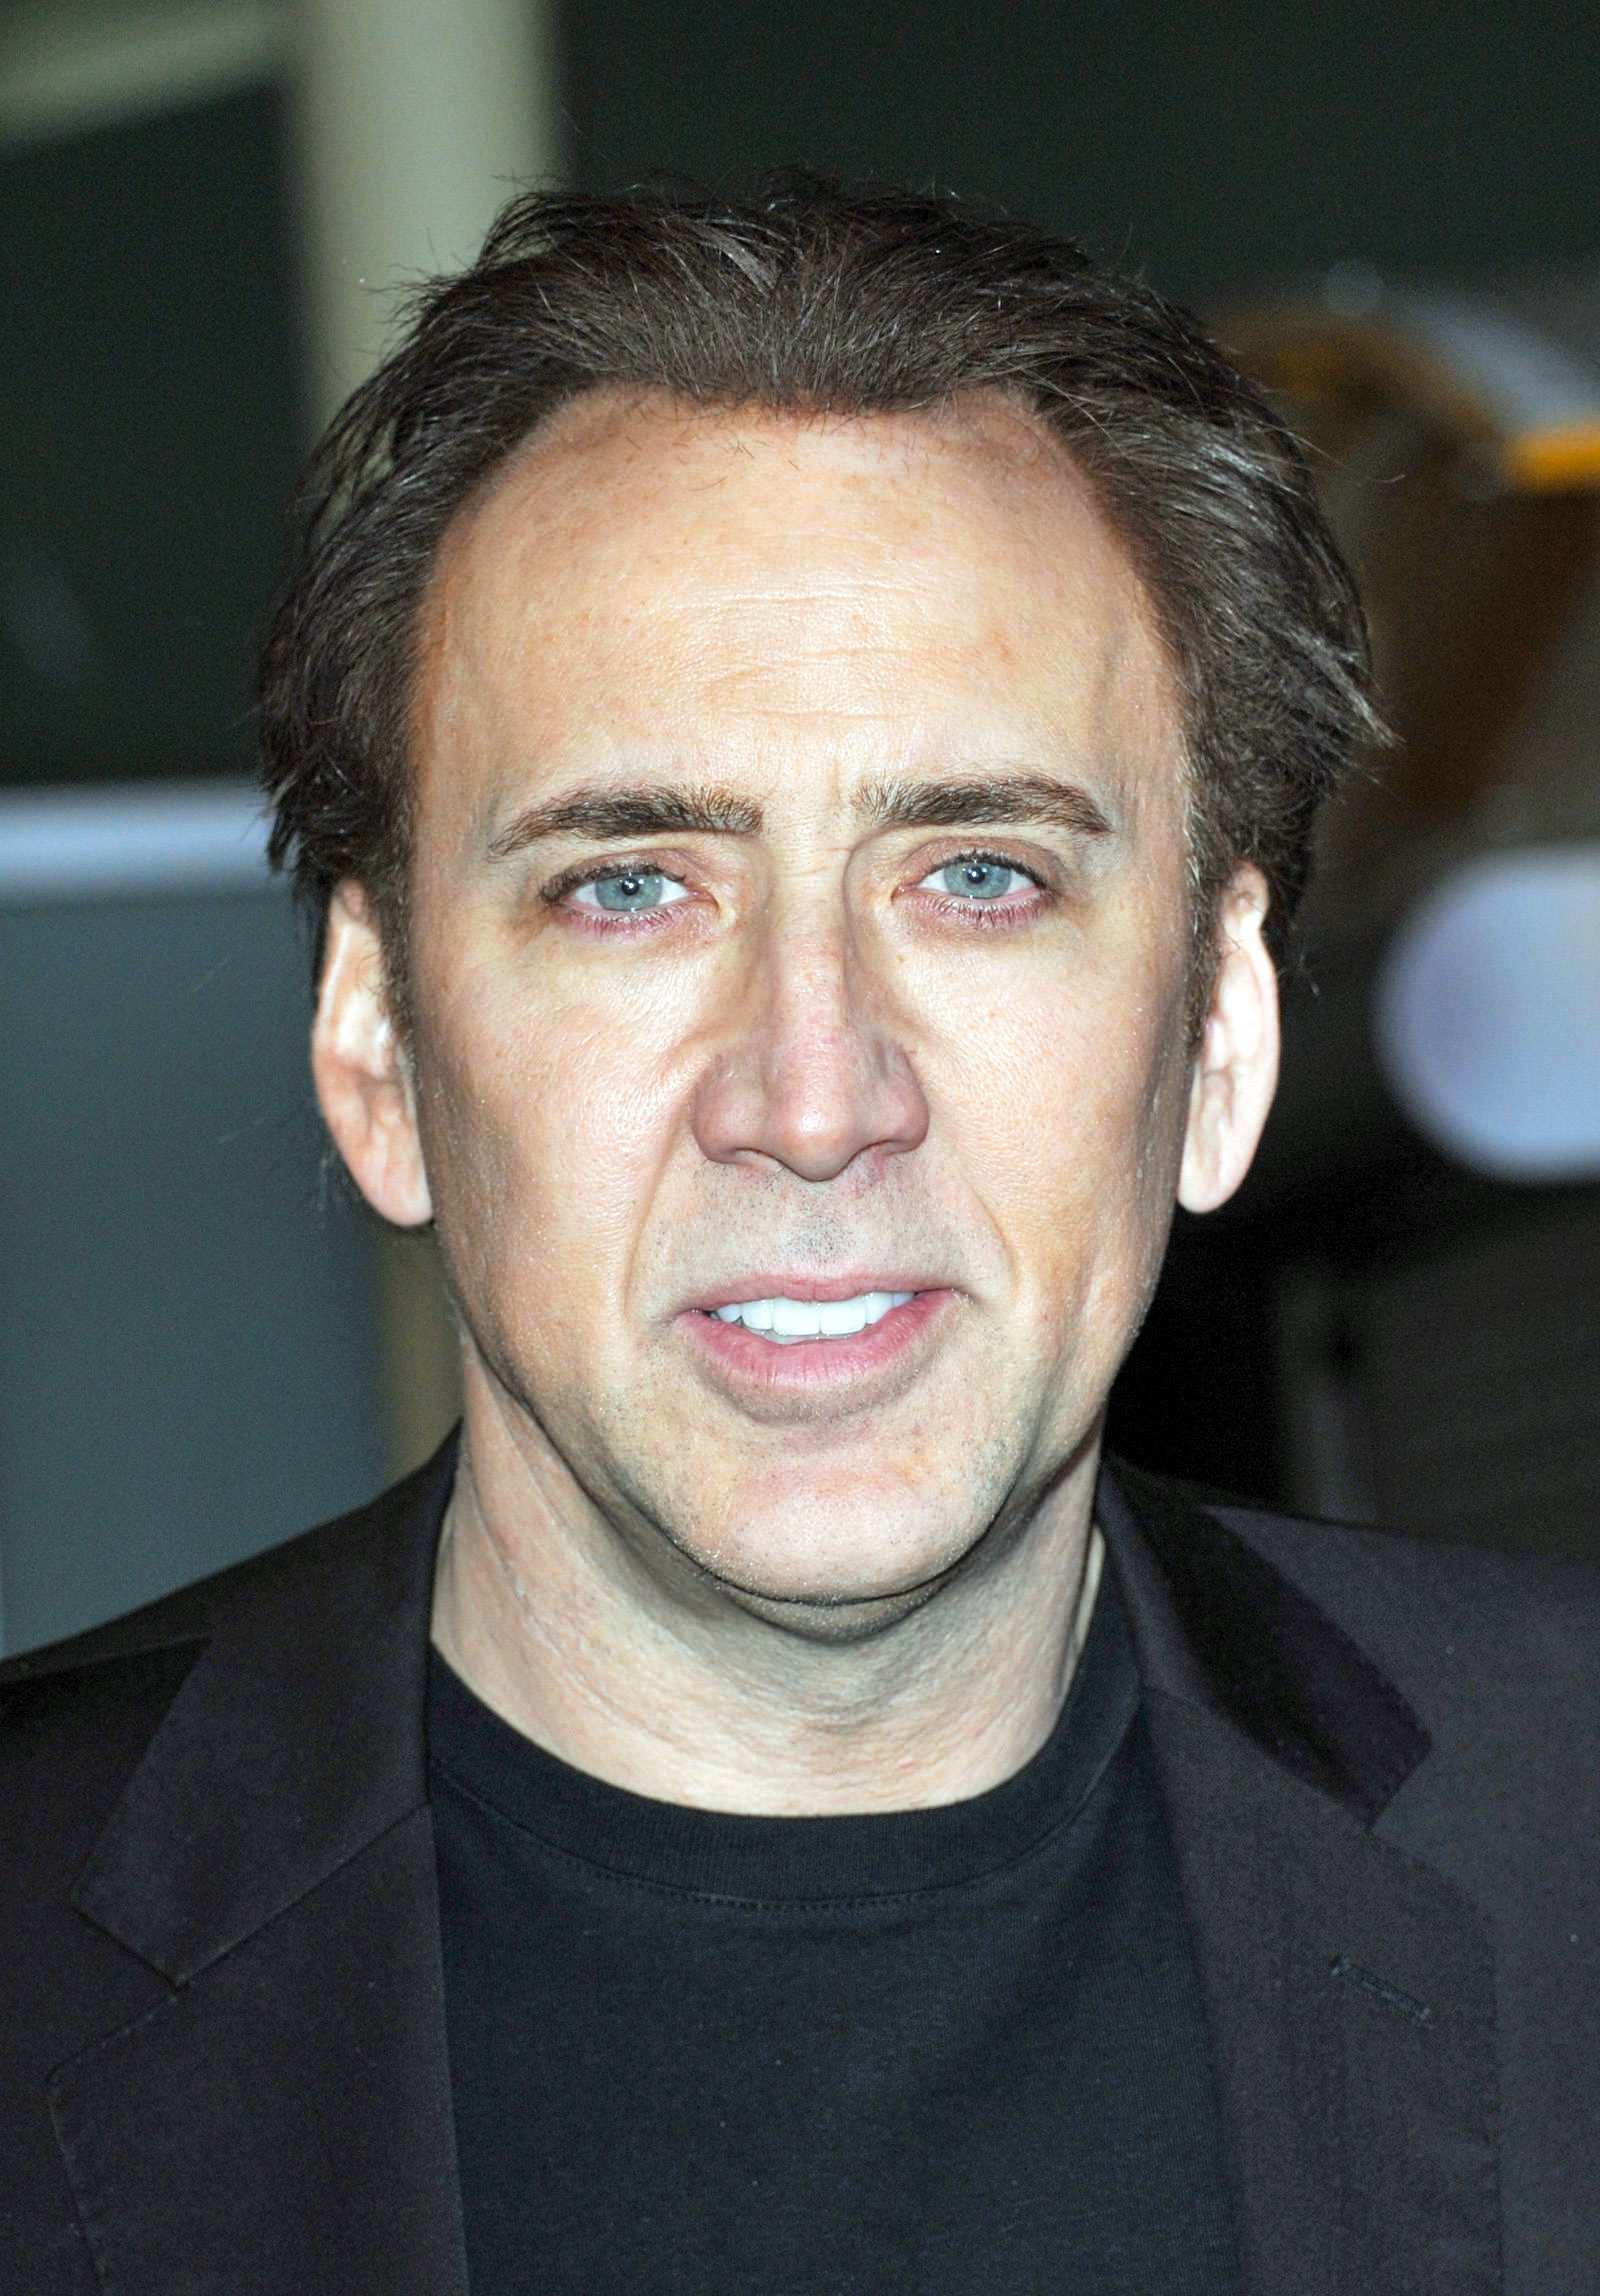 Nic Cage’s long, slicked-back